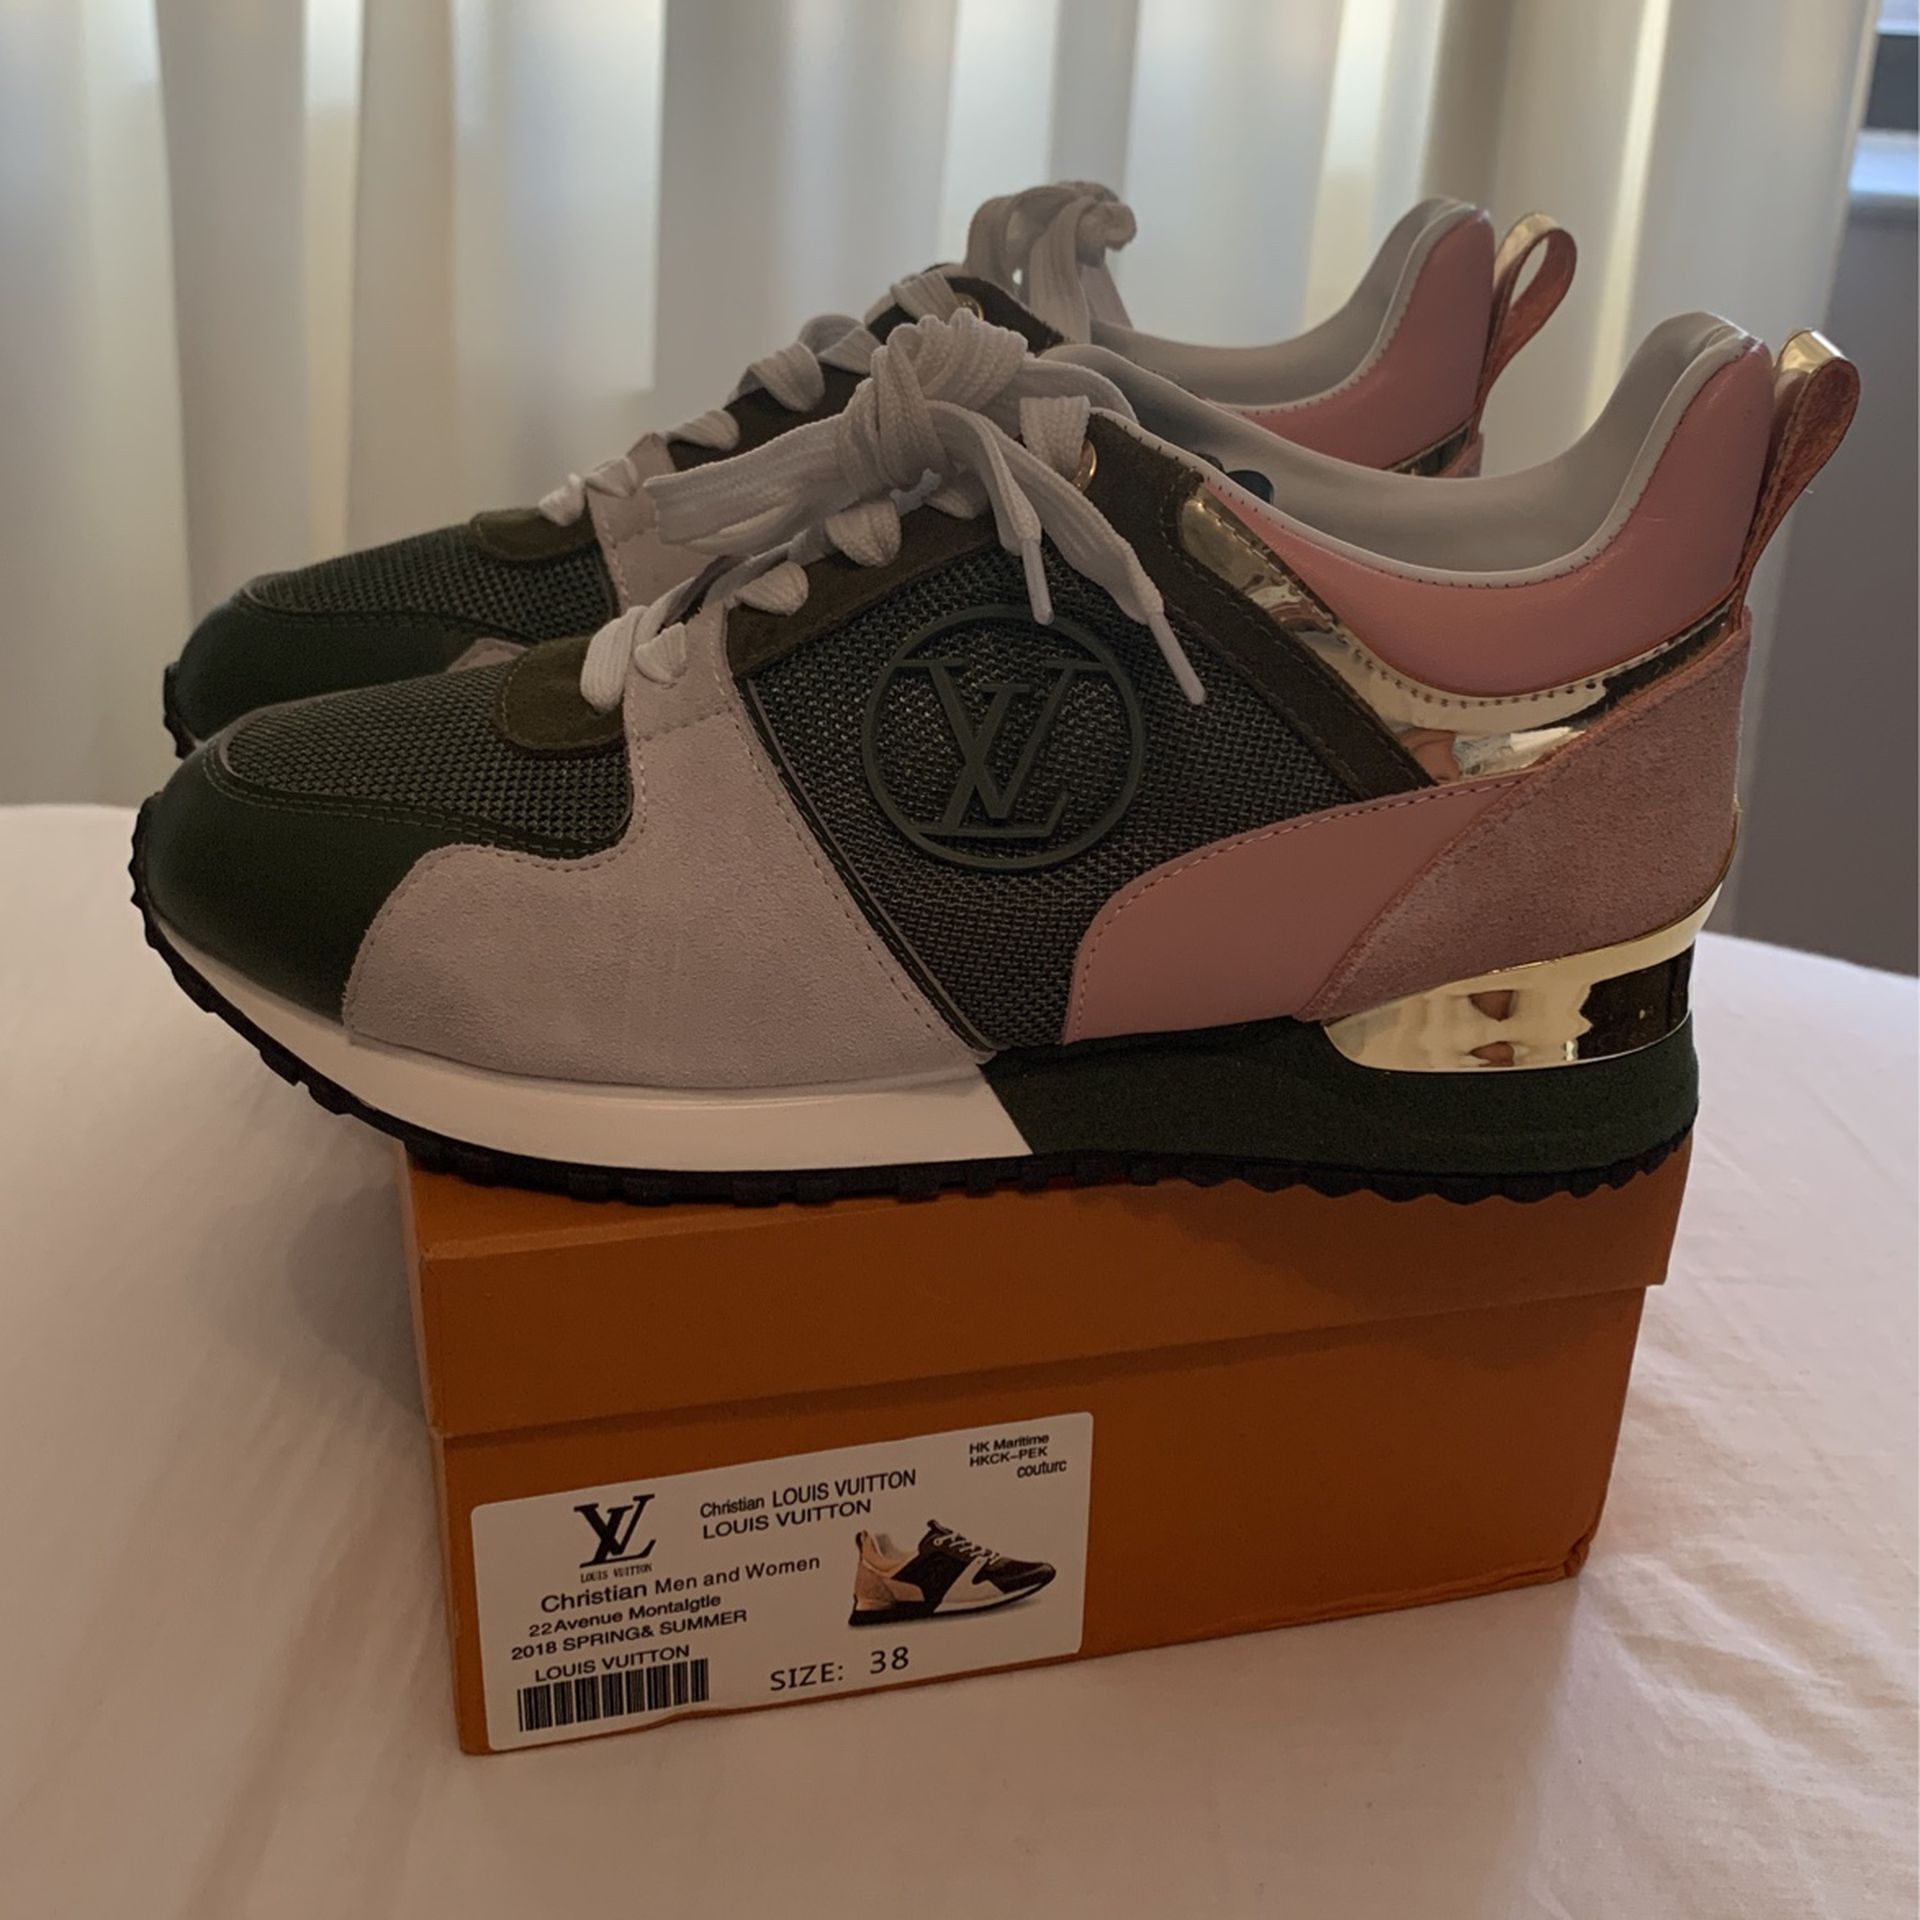 Louis Vuitton Run Away Sneakers SIZE 10.5 for Sale in The Bronx